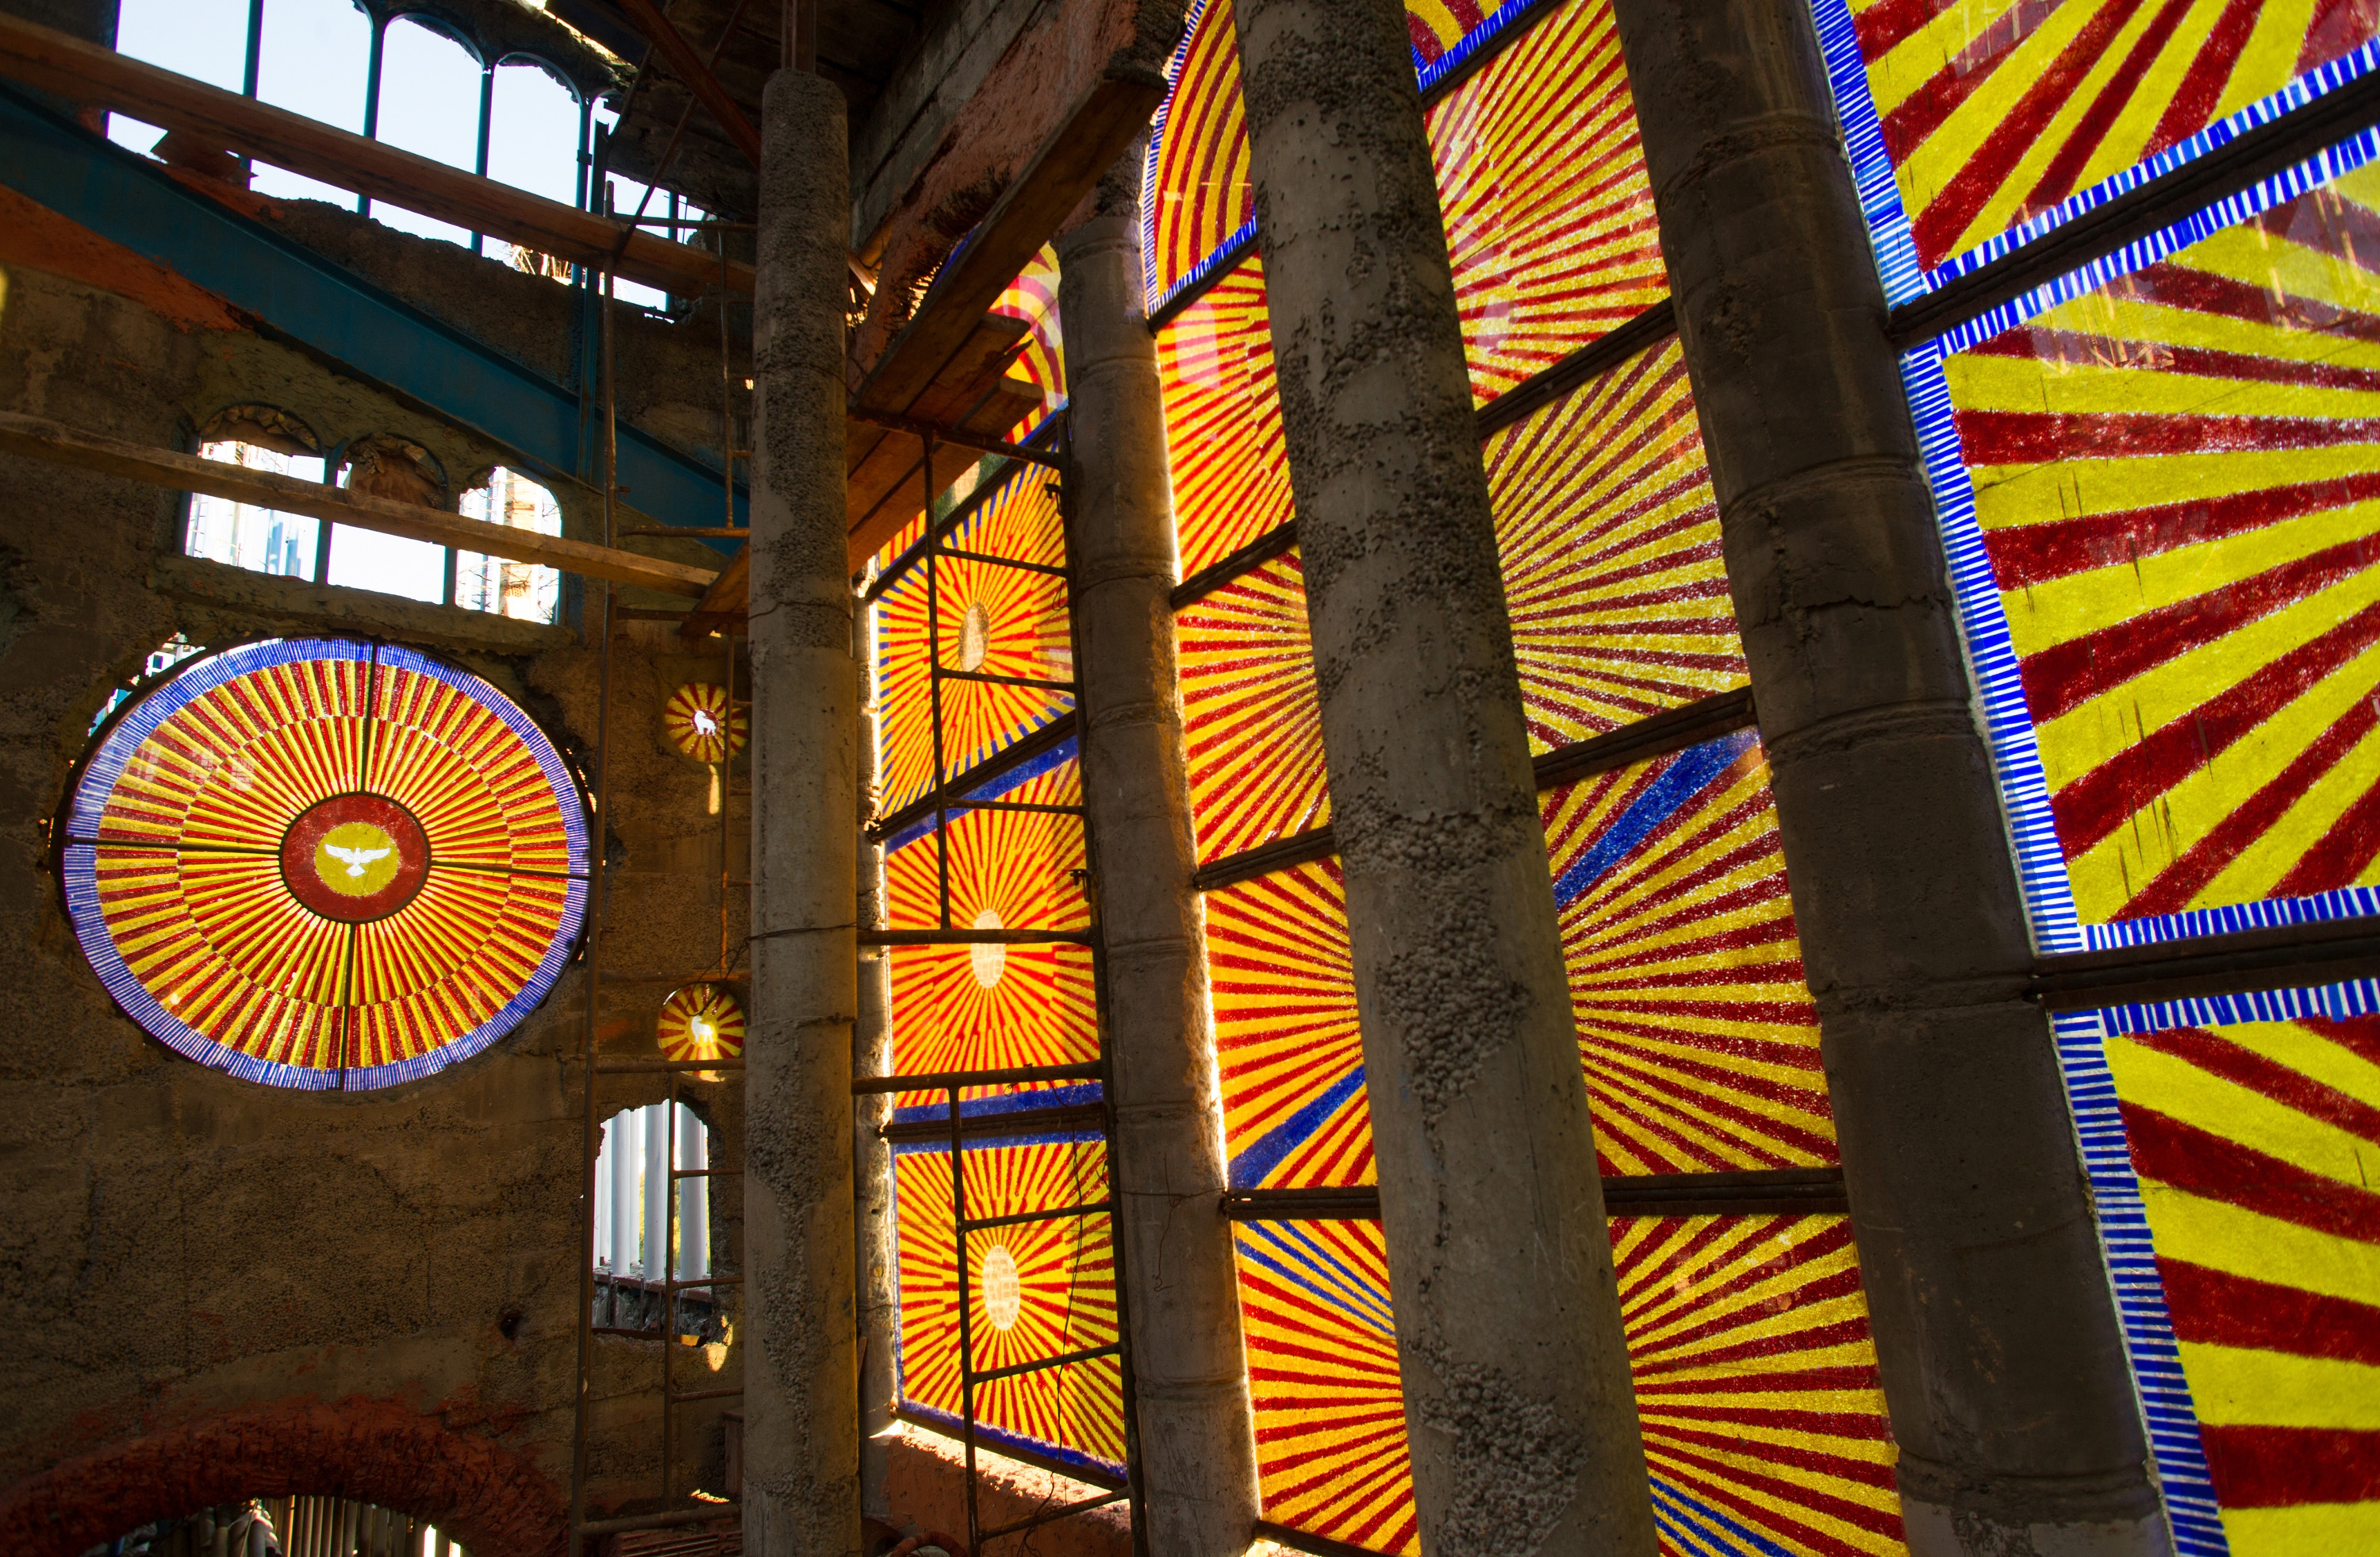 Former Monk Builds His Own Cathedral